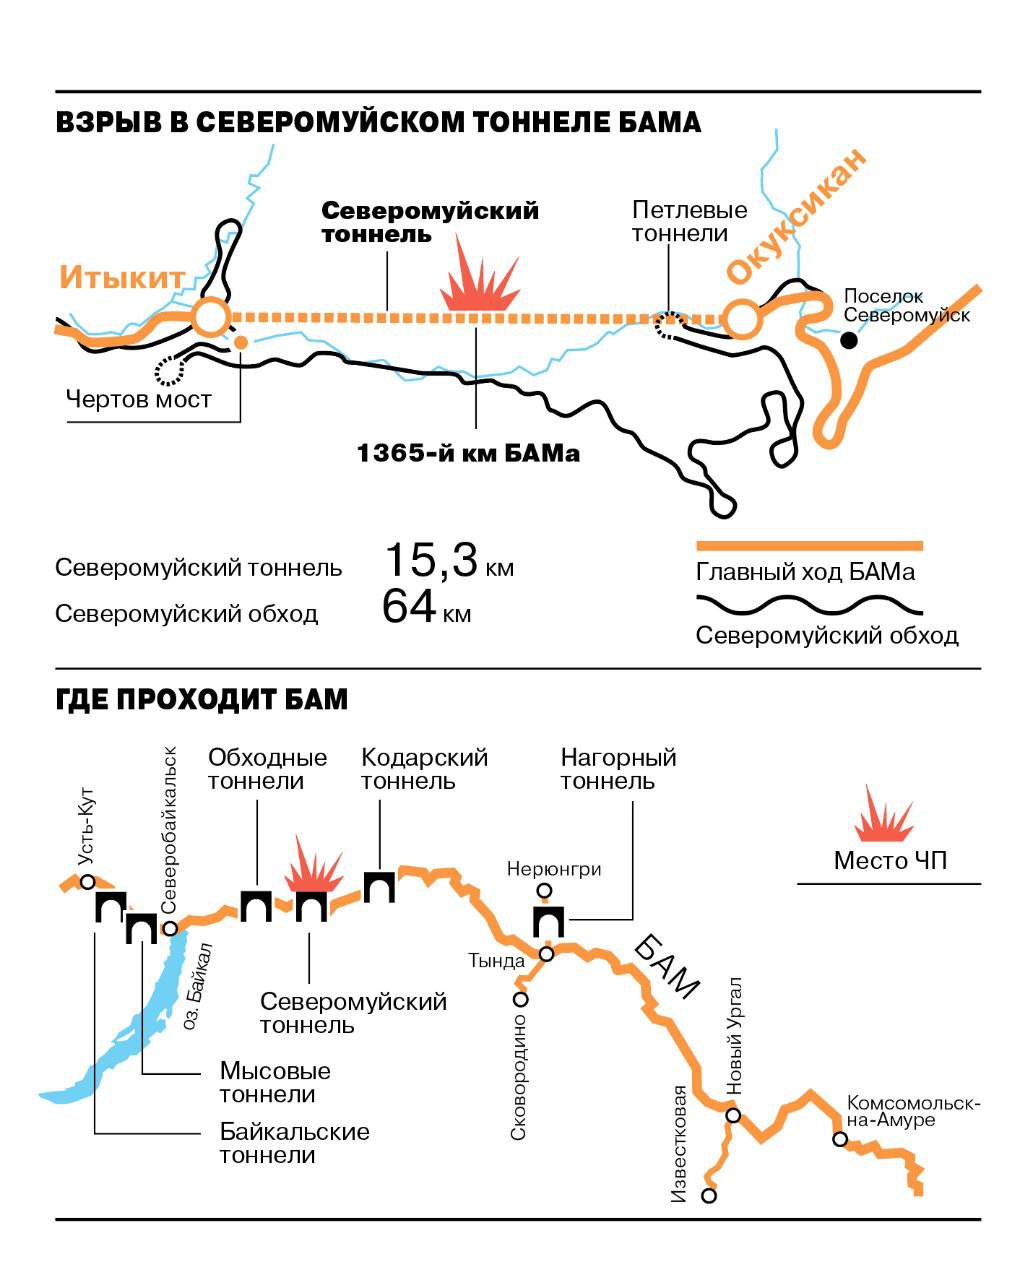 russian infographic explaining the importance of the Severomuysky tunnel for the paralysis of the Baikal–Amur Mainline